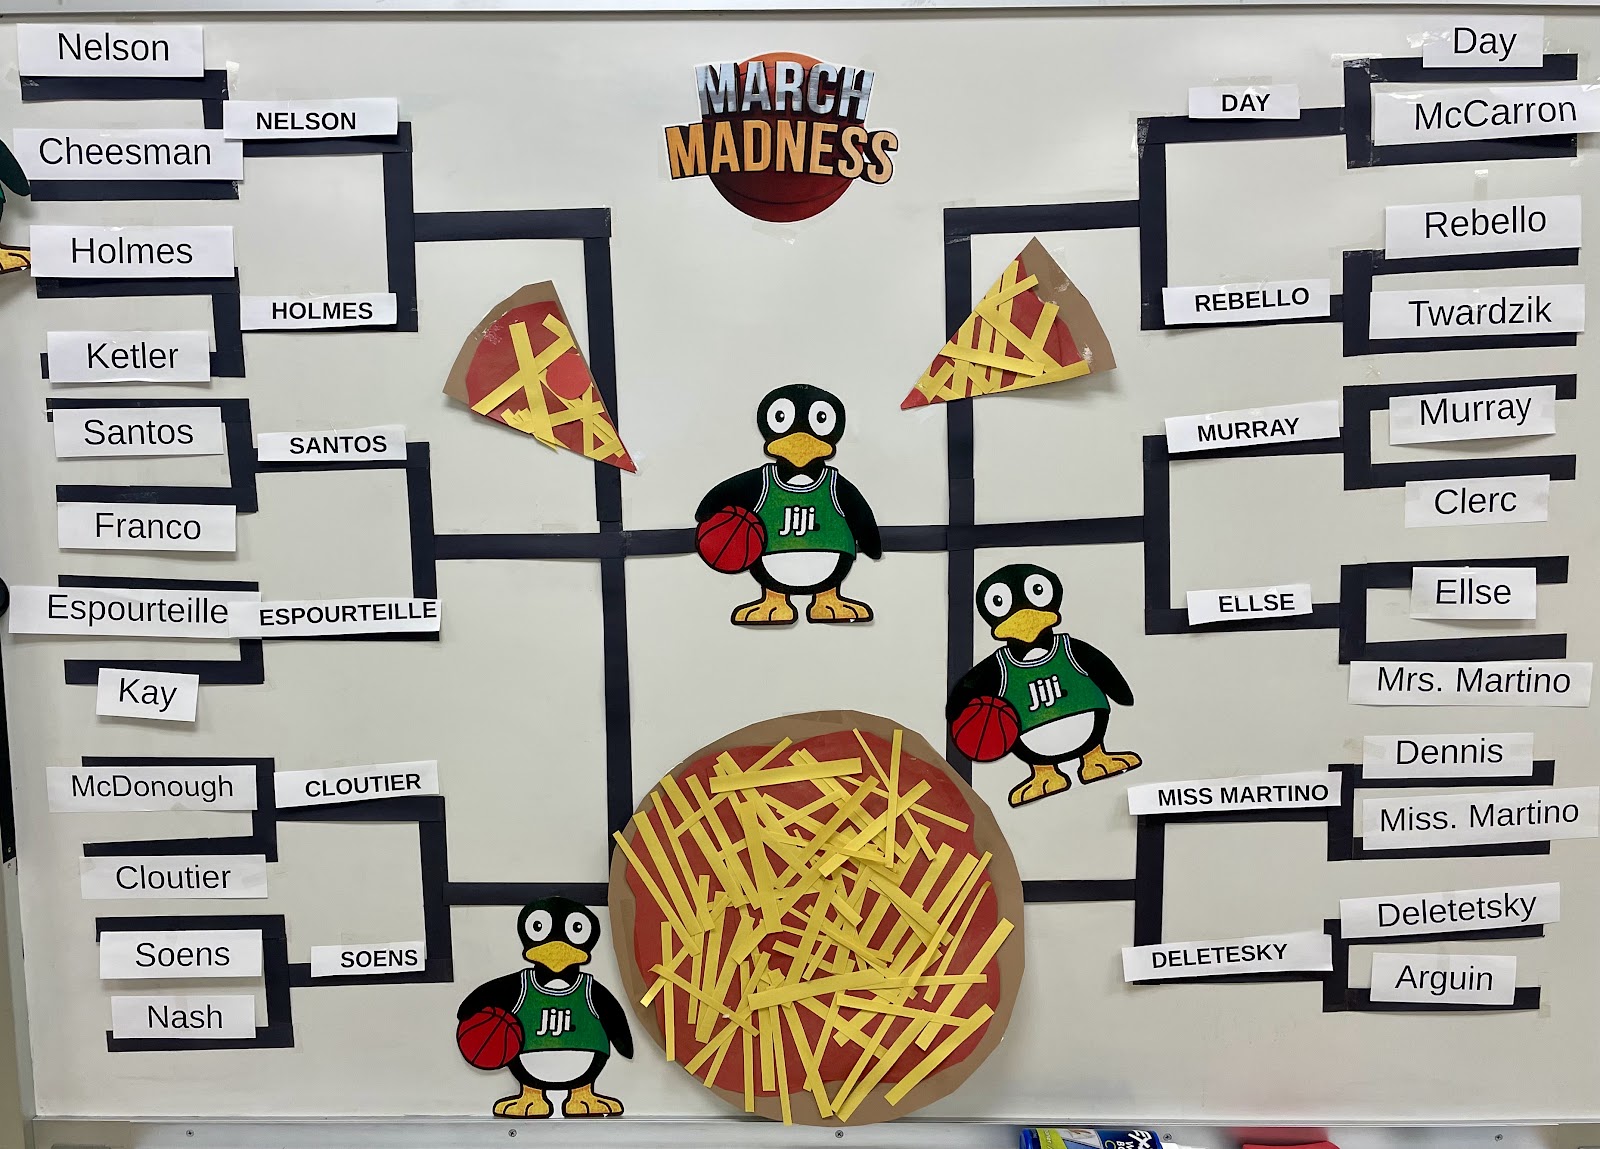 image of the March Madness Math puzzles brackets